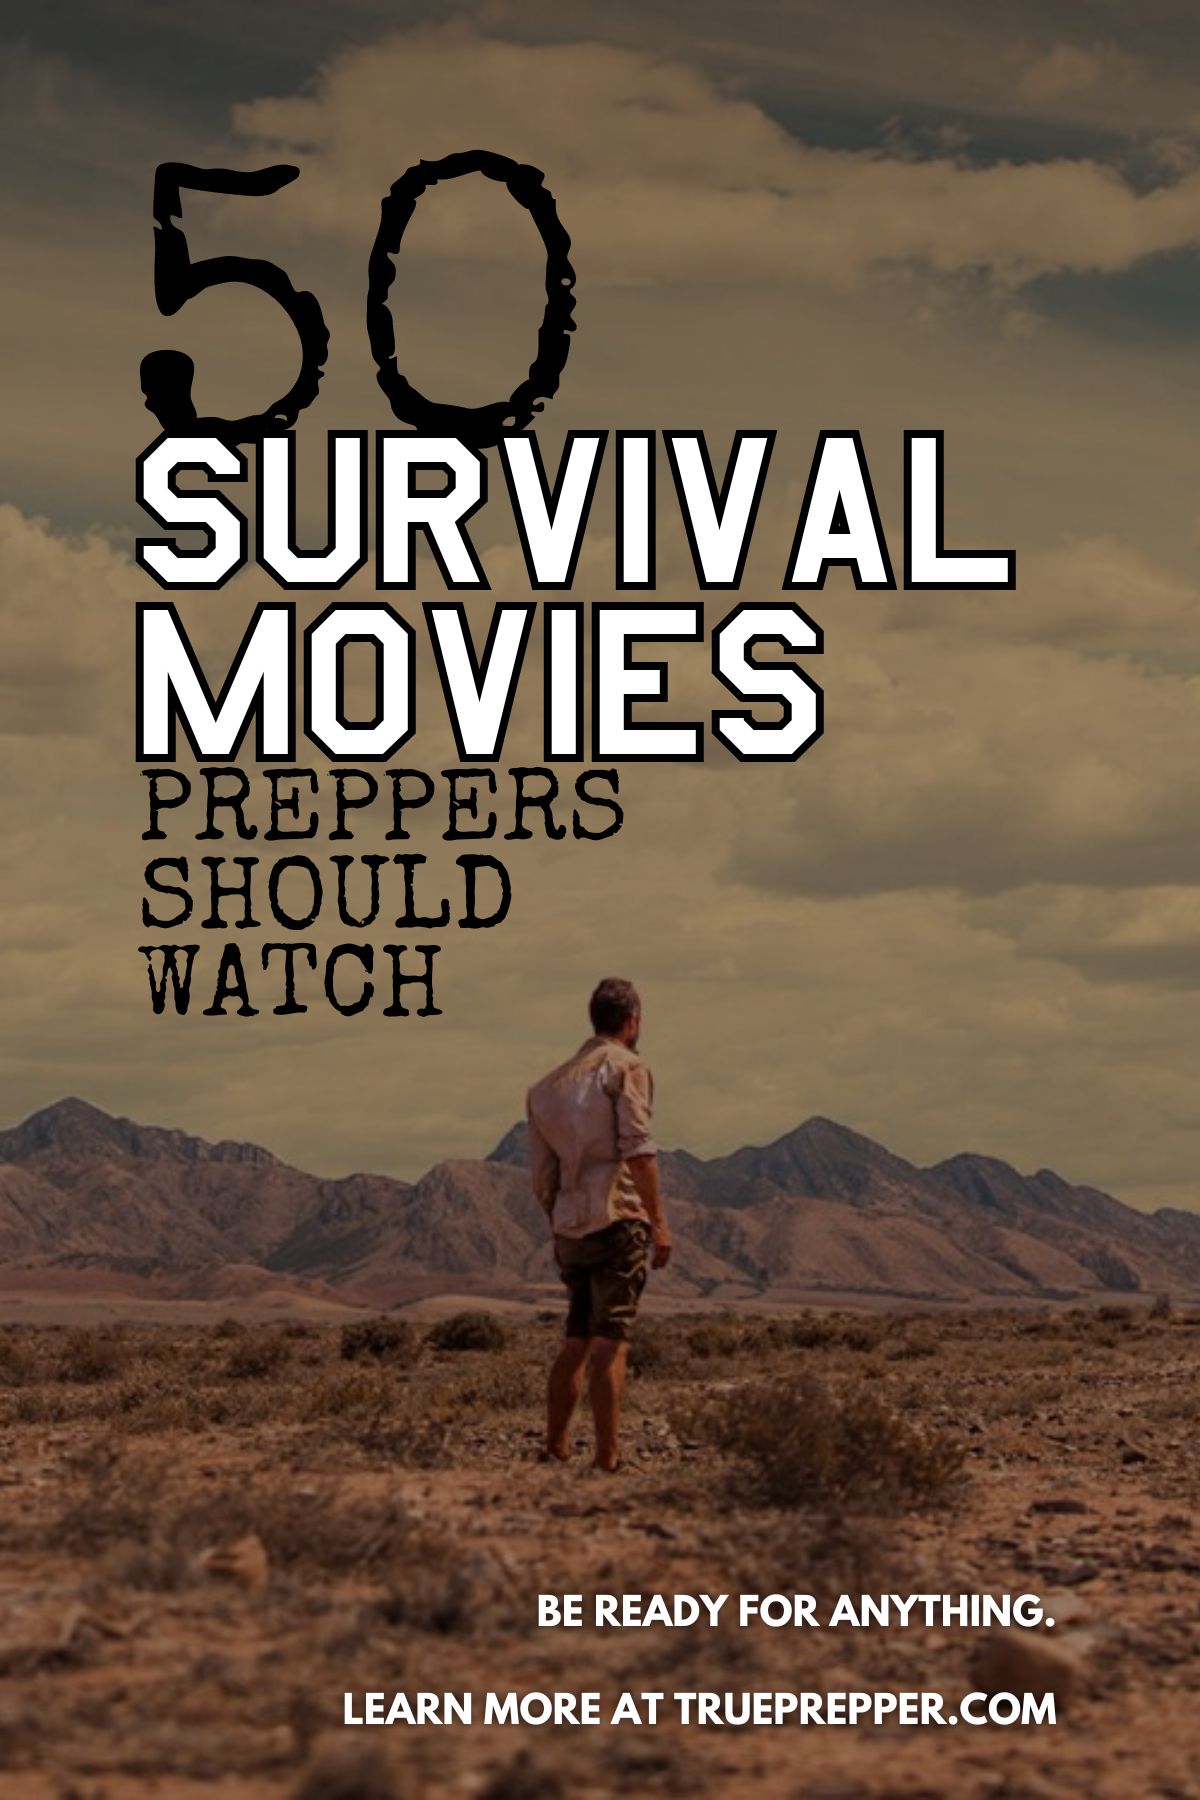 50 Survival Movies Preppers Should Watch (1)